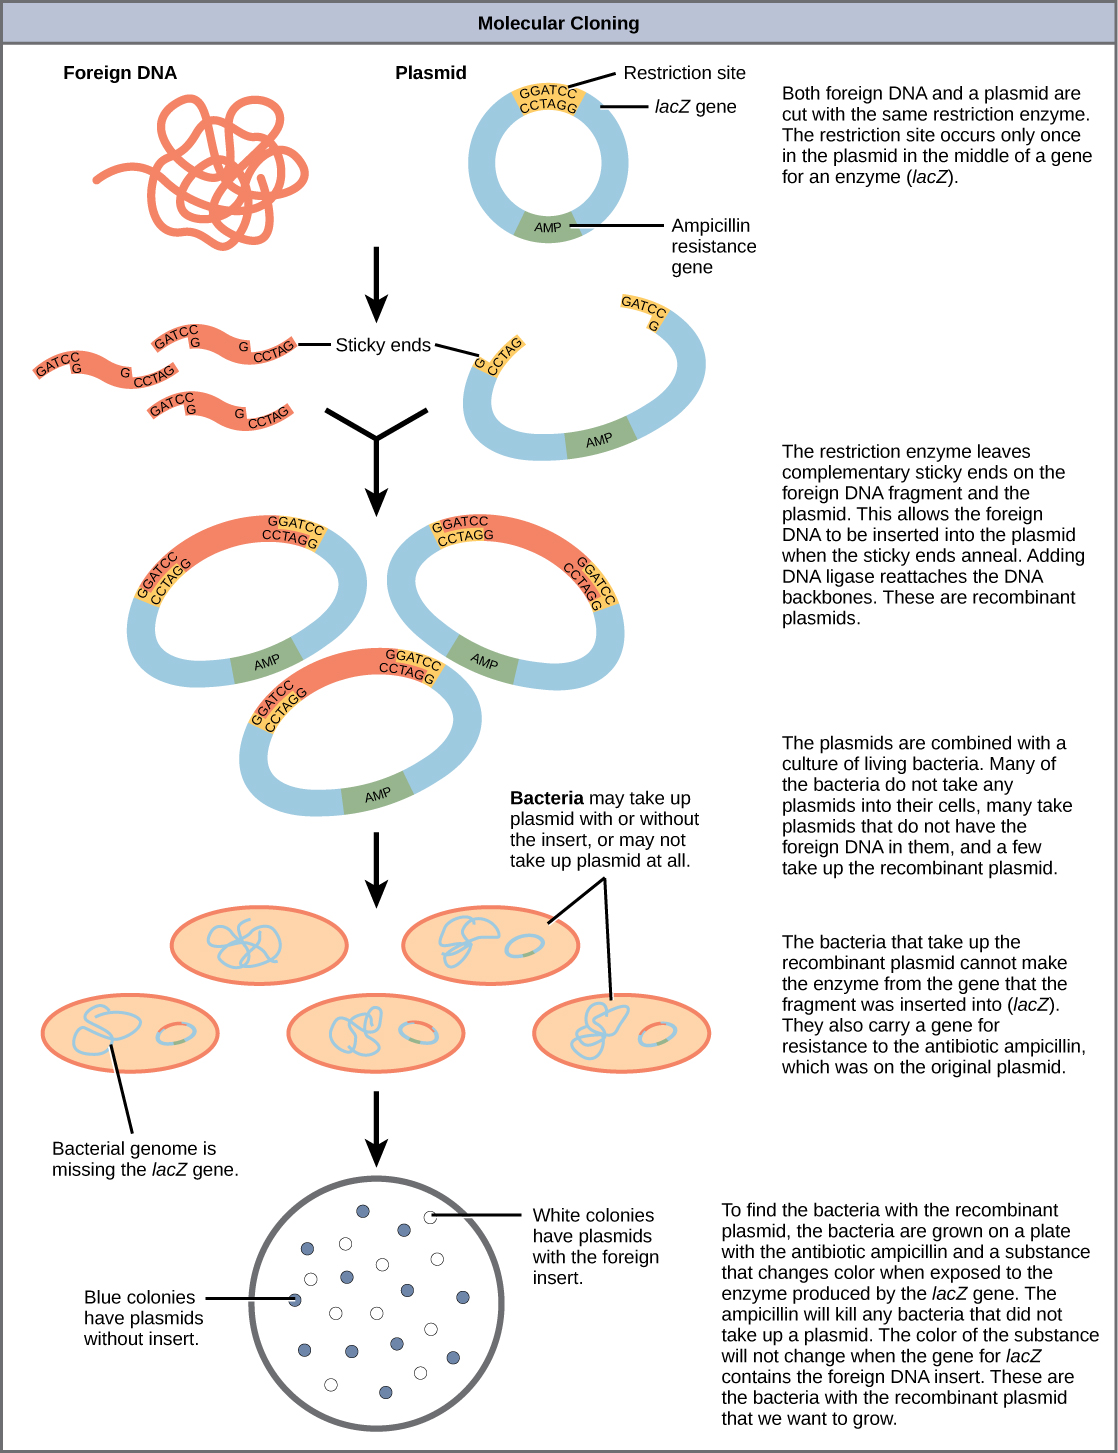 What is involved in creating genetically modified bacteria